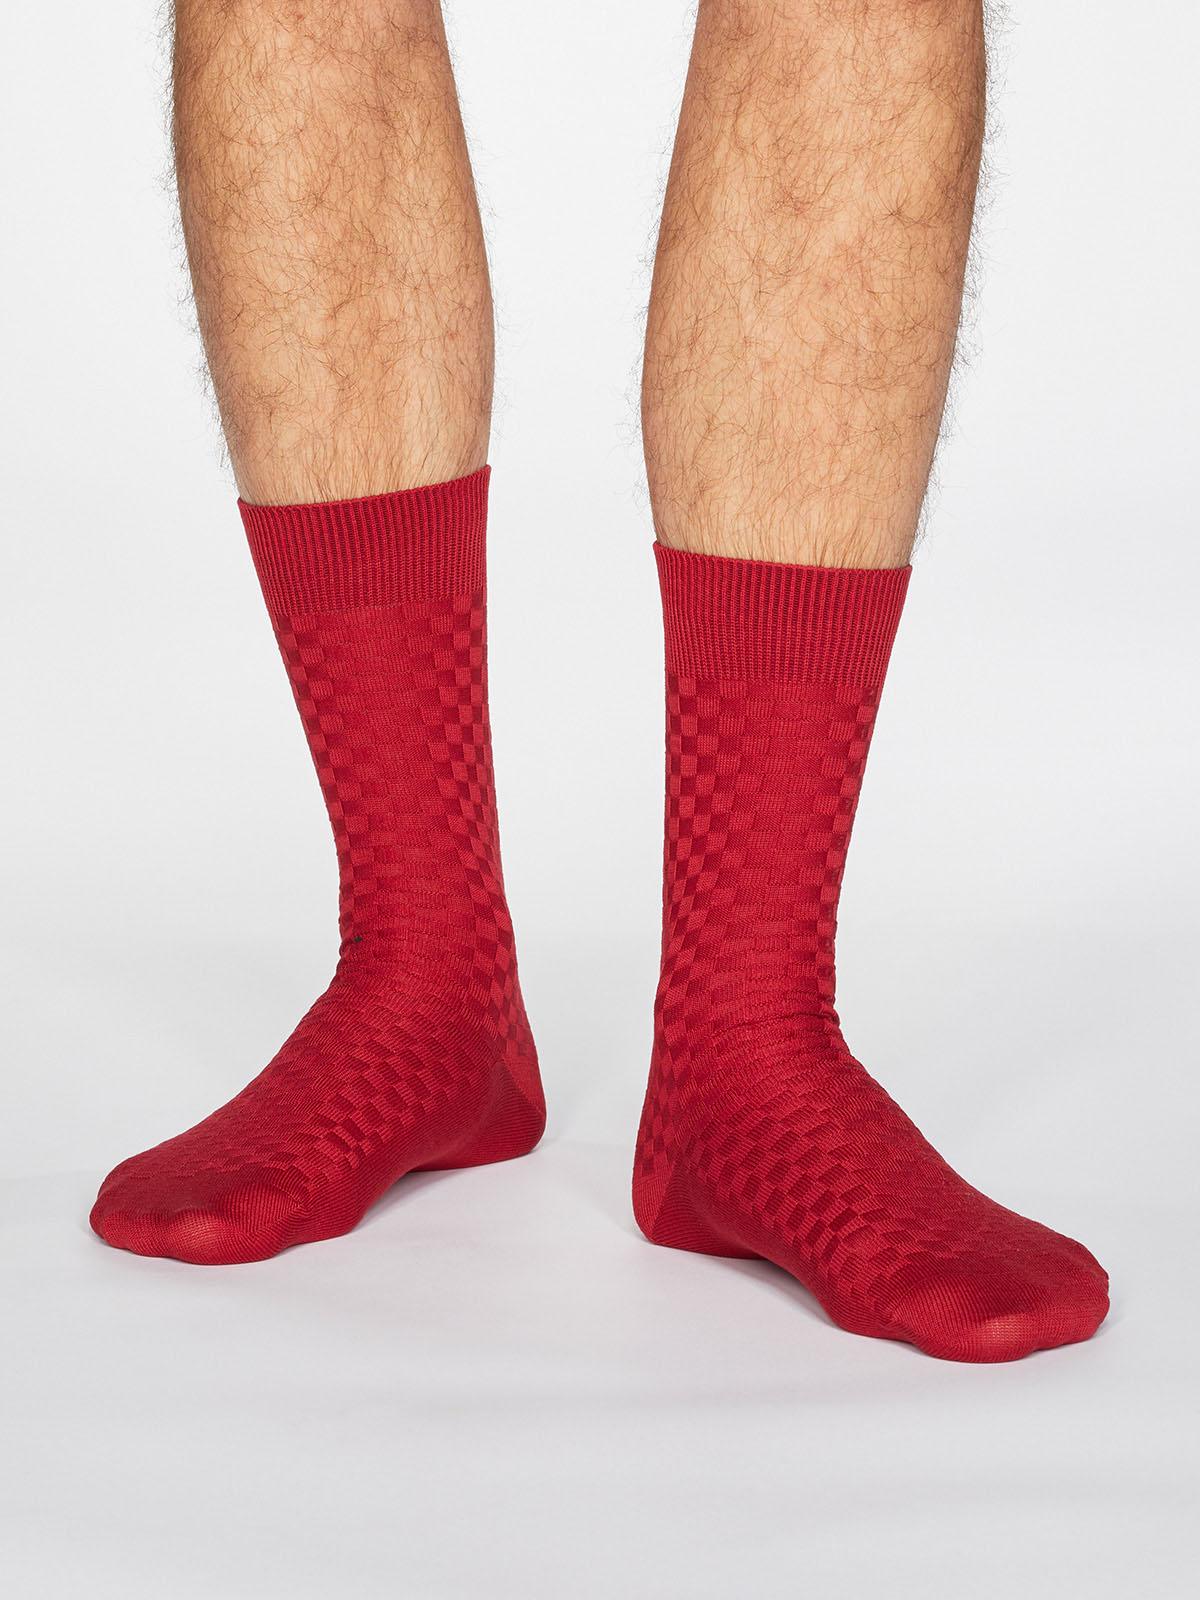 Cameron Organic Cotton Suit Socks - Berry Red - Thought Clothing UK